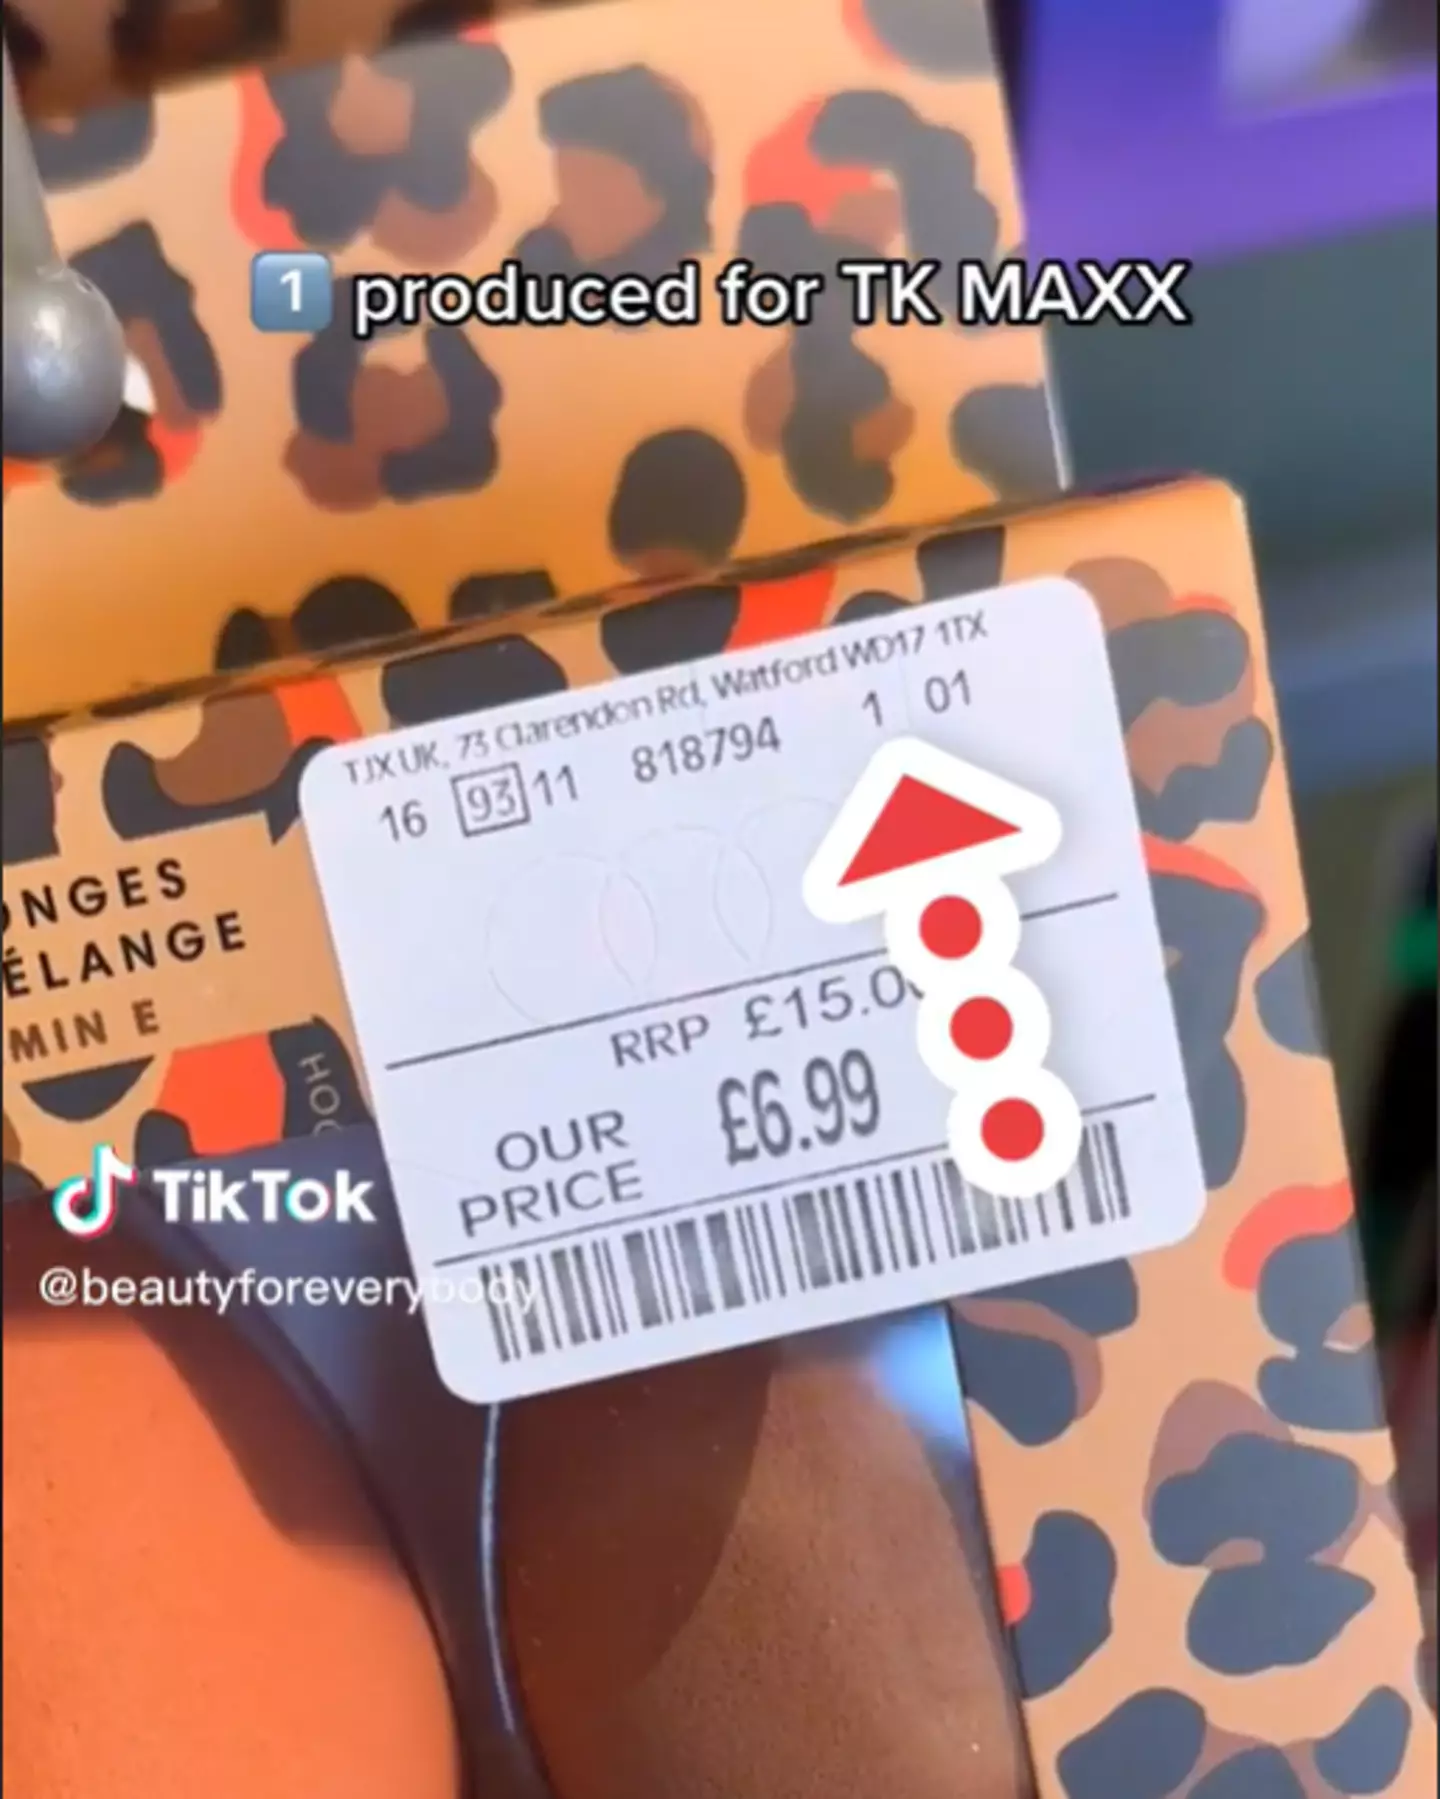 Number '1' apparently means the product is made by TK Maxx.